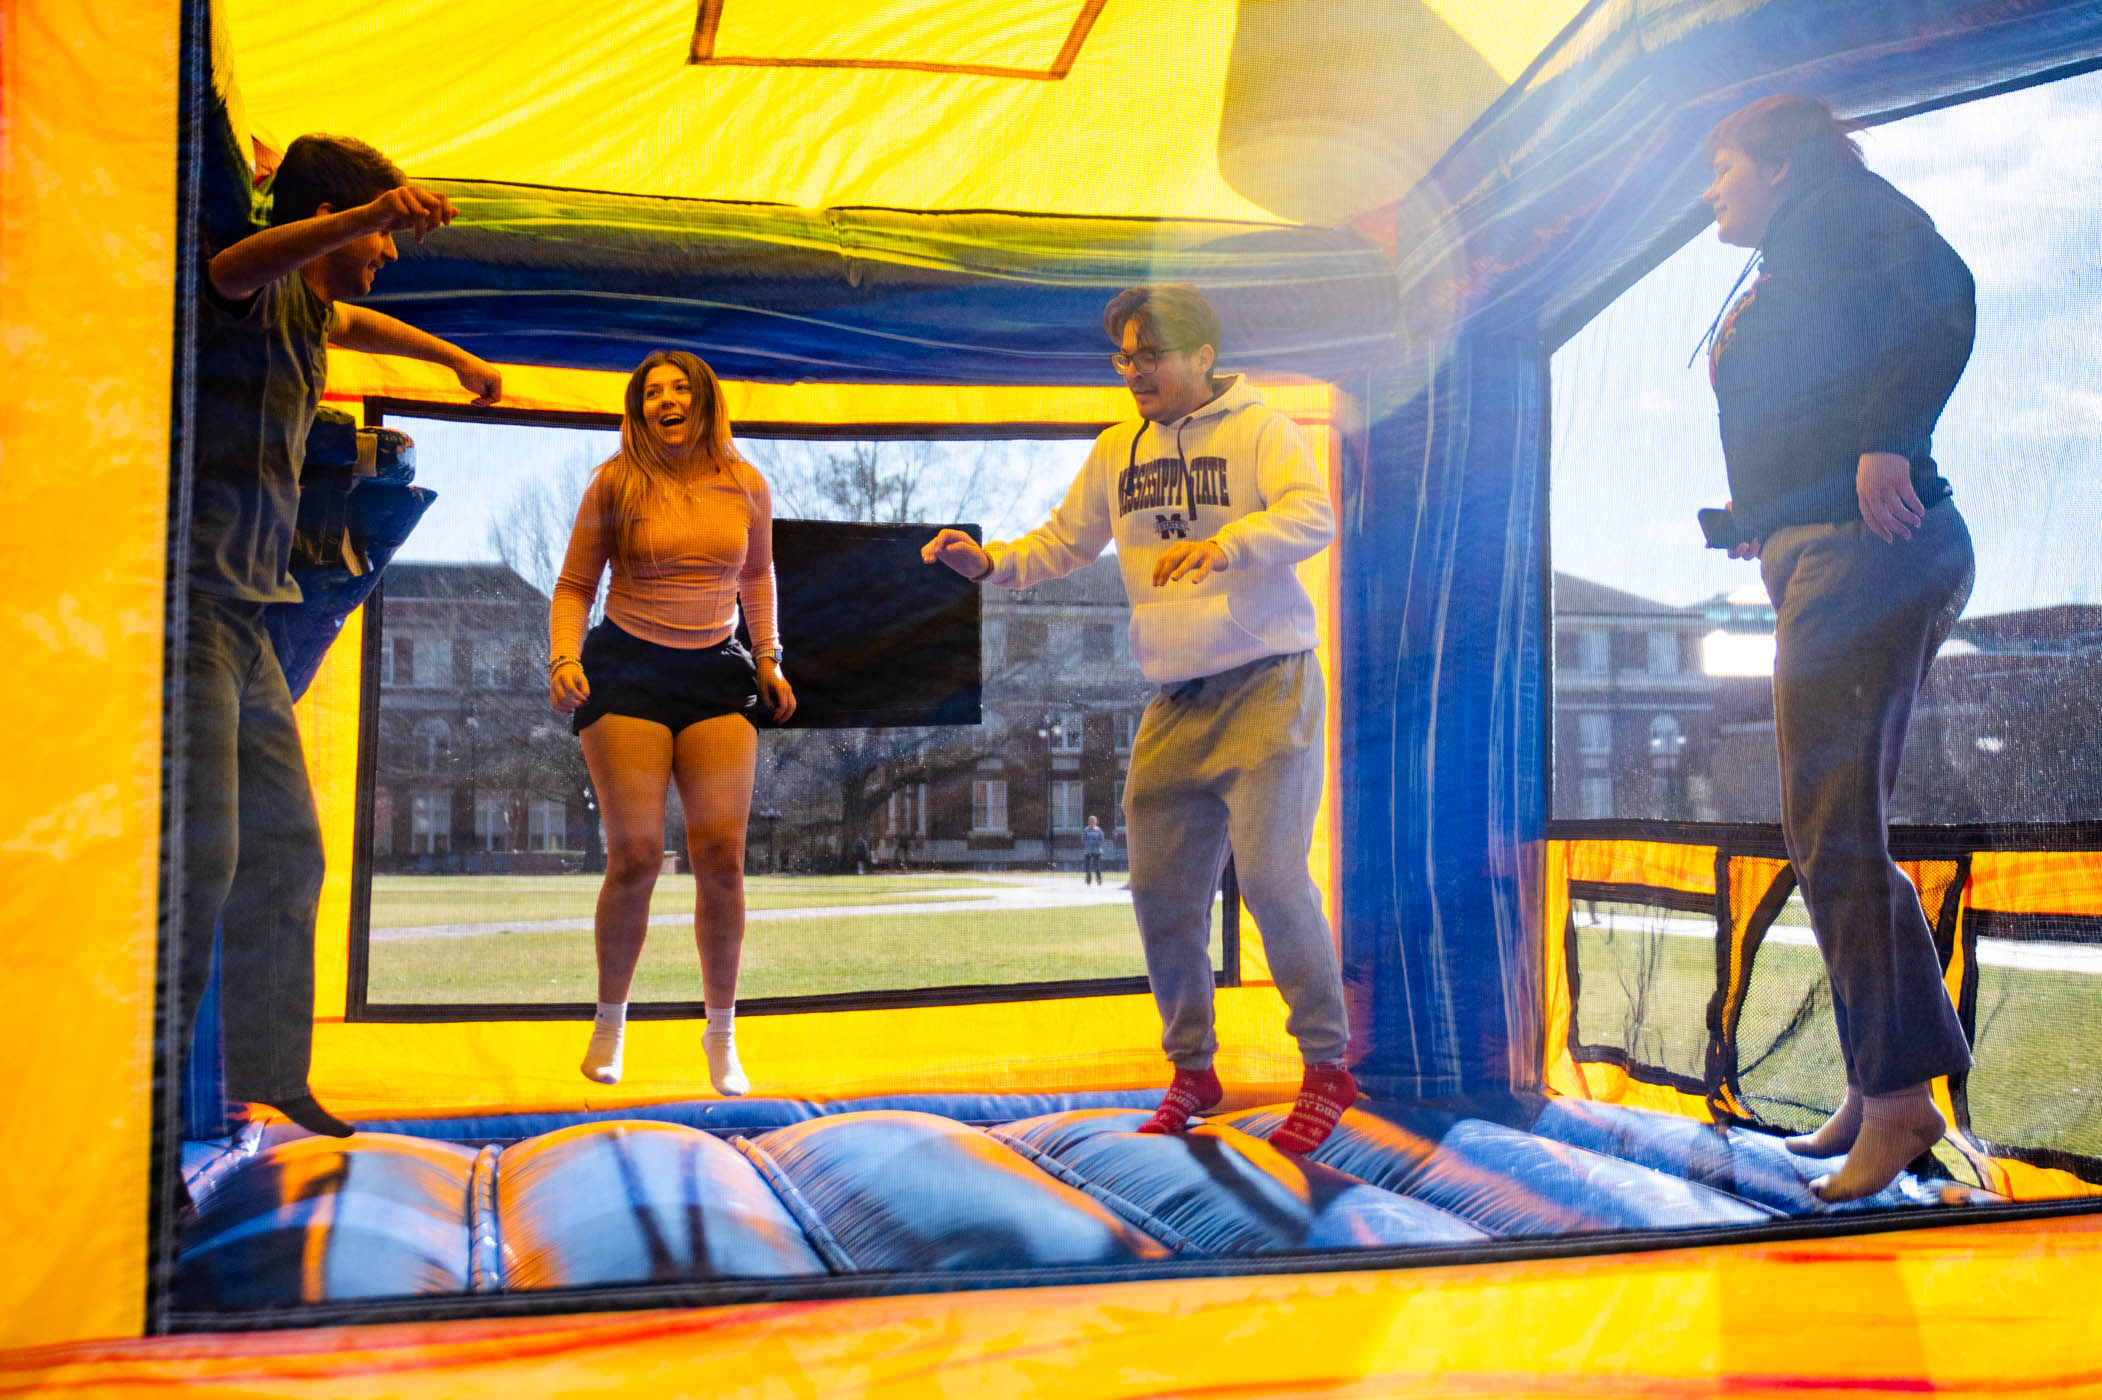 With a patch of warmer weather, students get outside [Feb. 2] and bounce around on a complimentary bounce-house provided by MSU&#039;s Student Affairs at &quot;Bounce Back to Classes.&quot; 